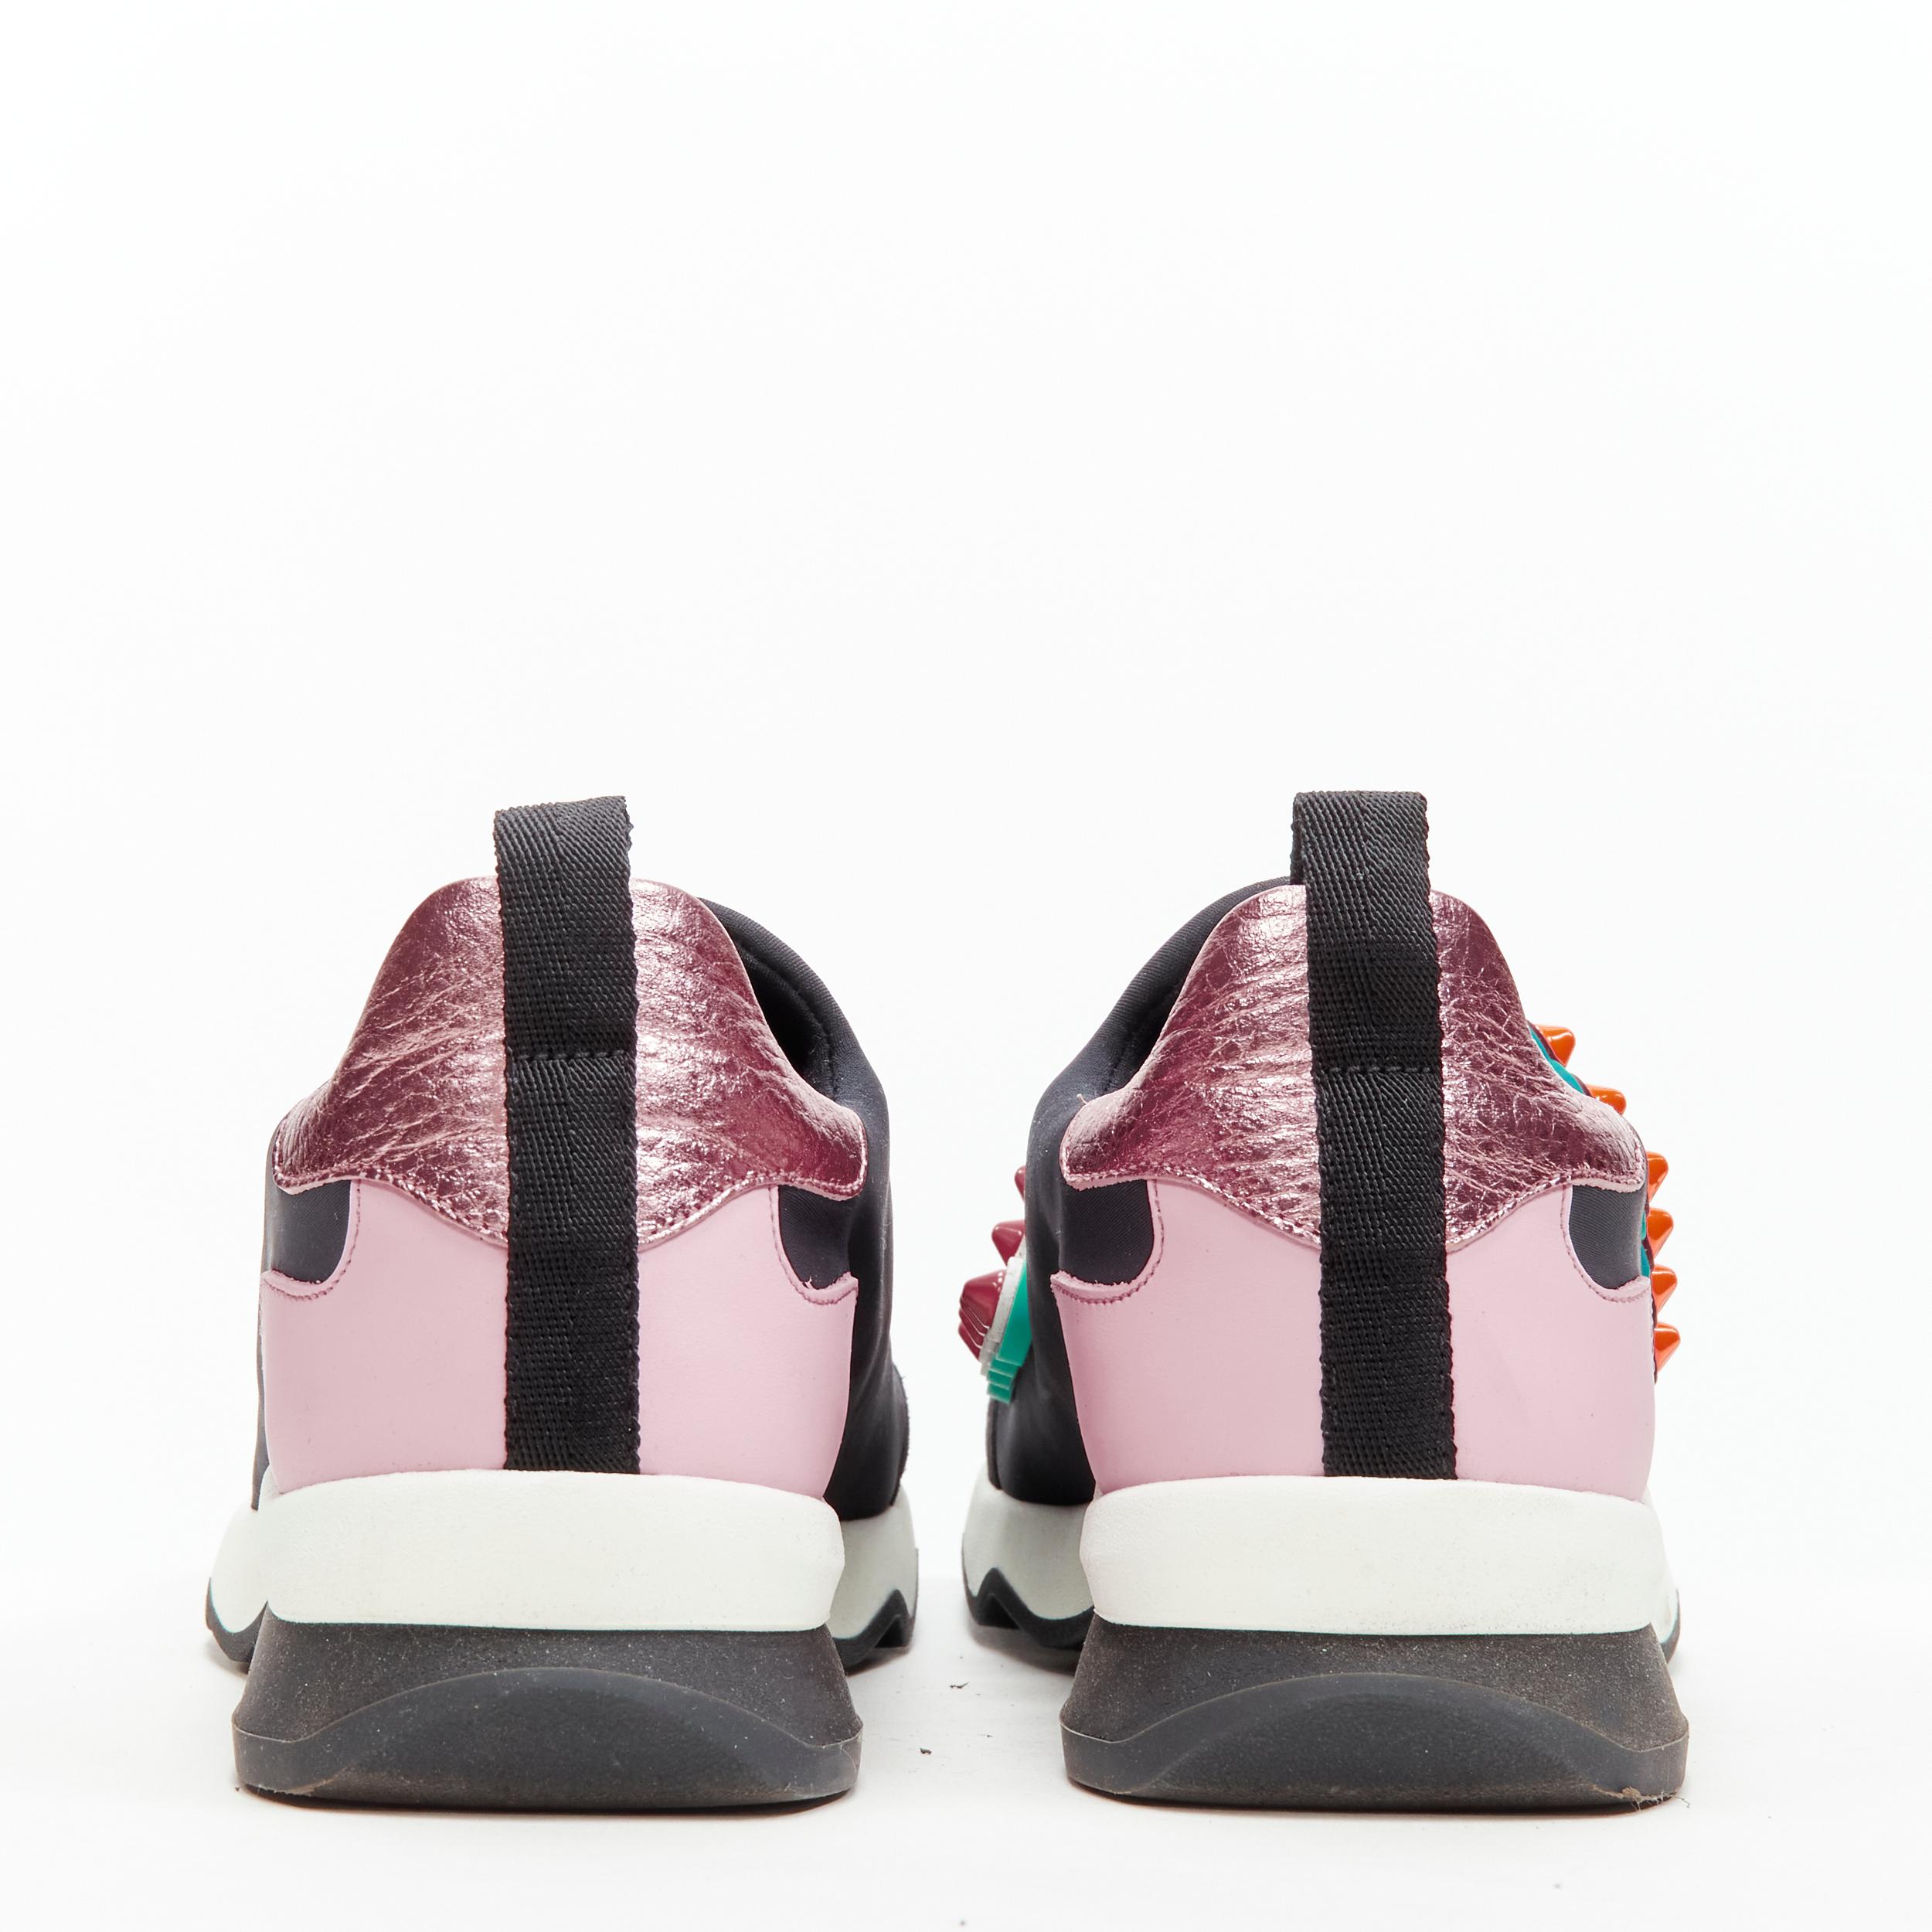 FENDI Fun Fair studded logo rubber applique black pink neoprene low sneaker EU36 In Excellent Condition For Sale In Hong Kong, NT